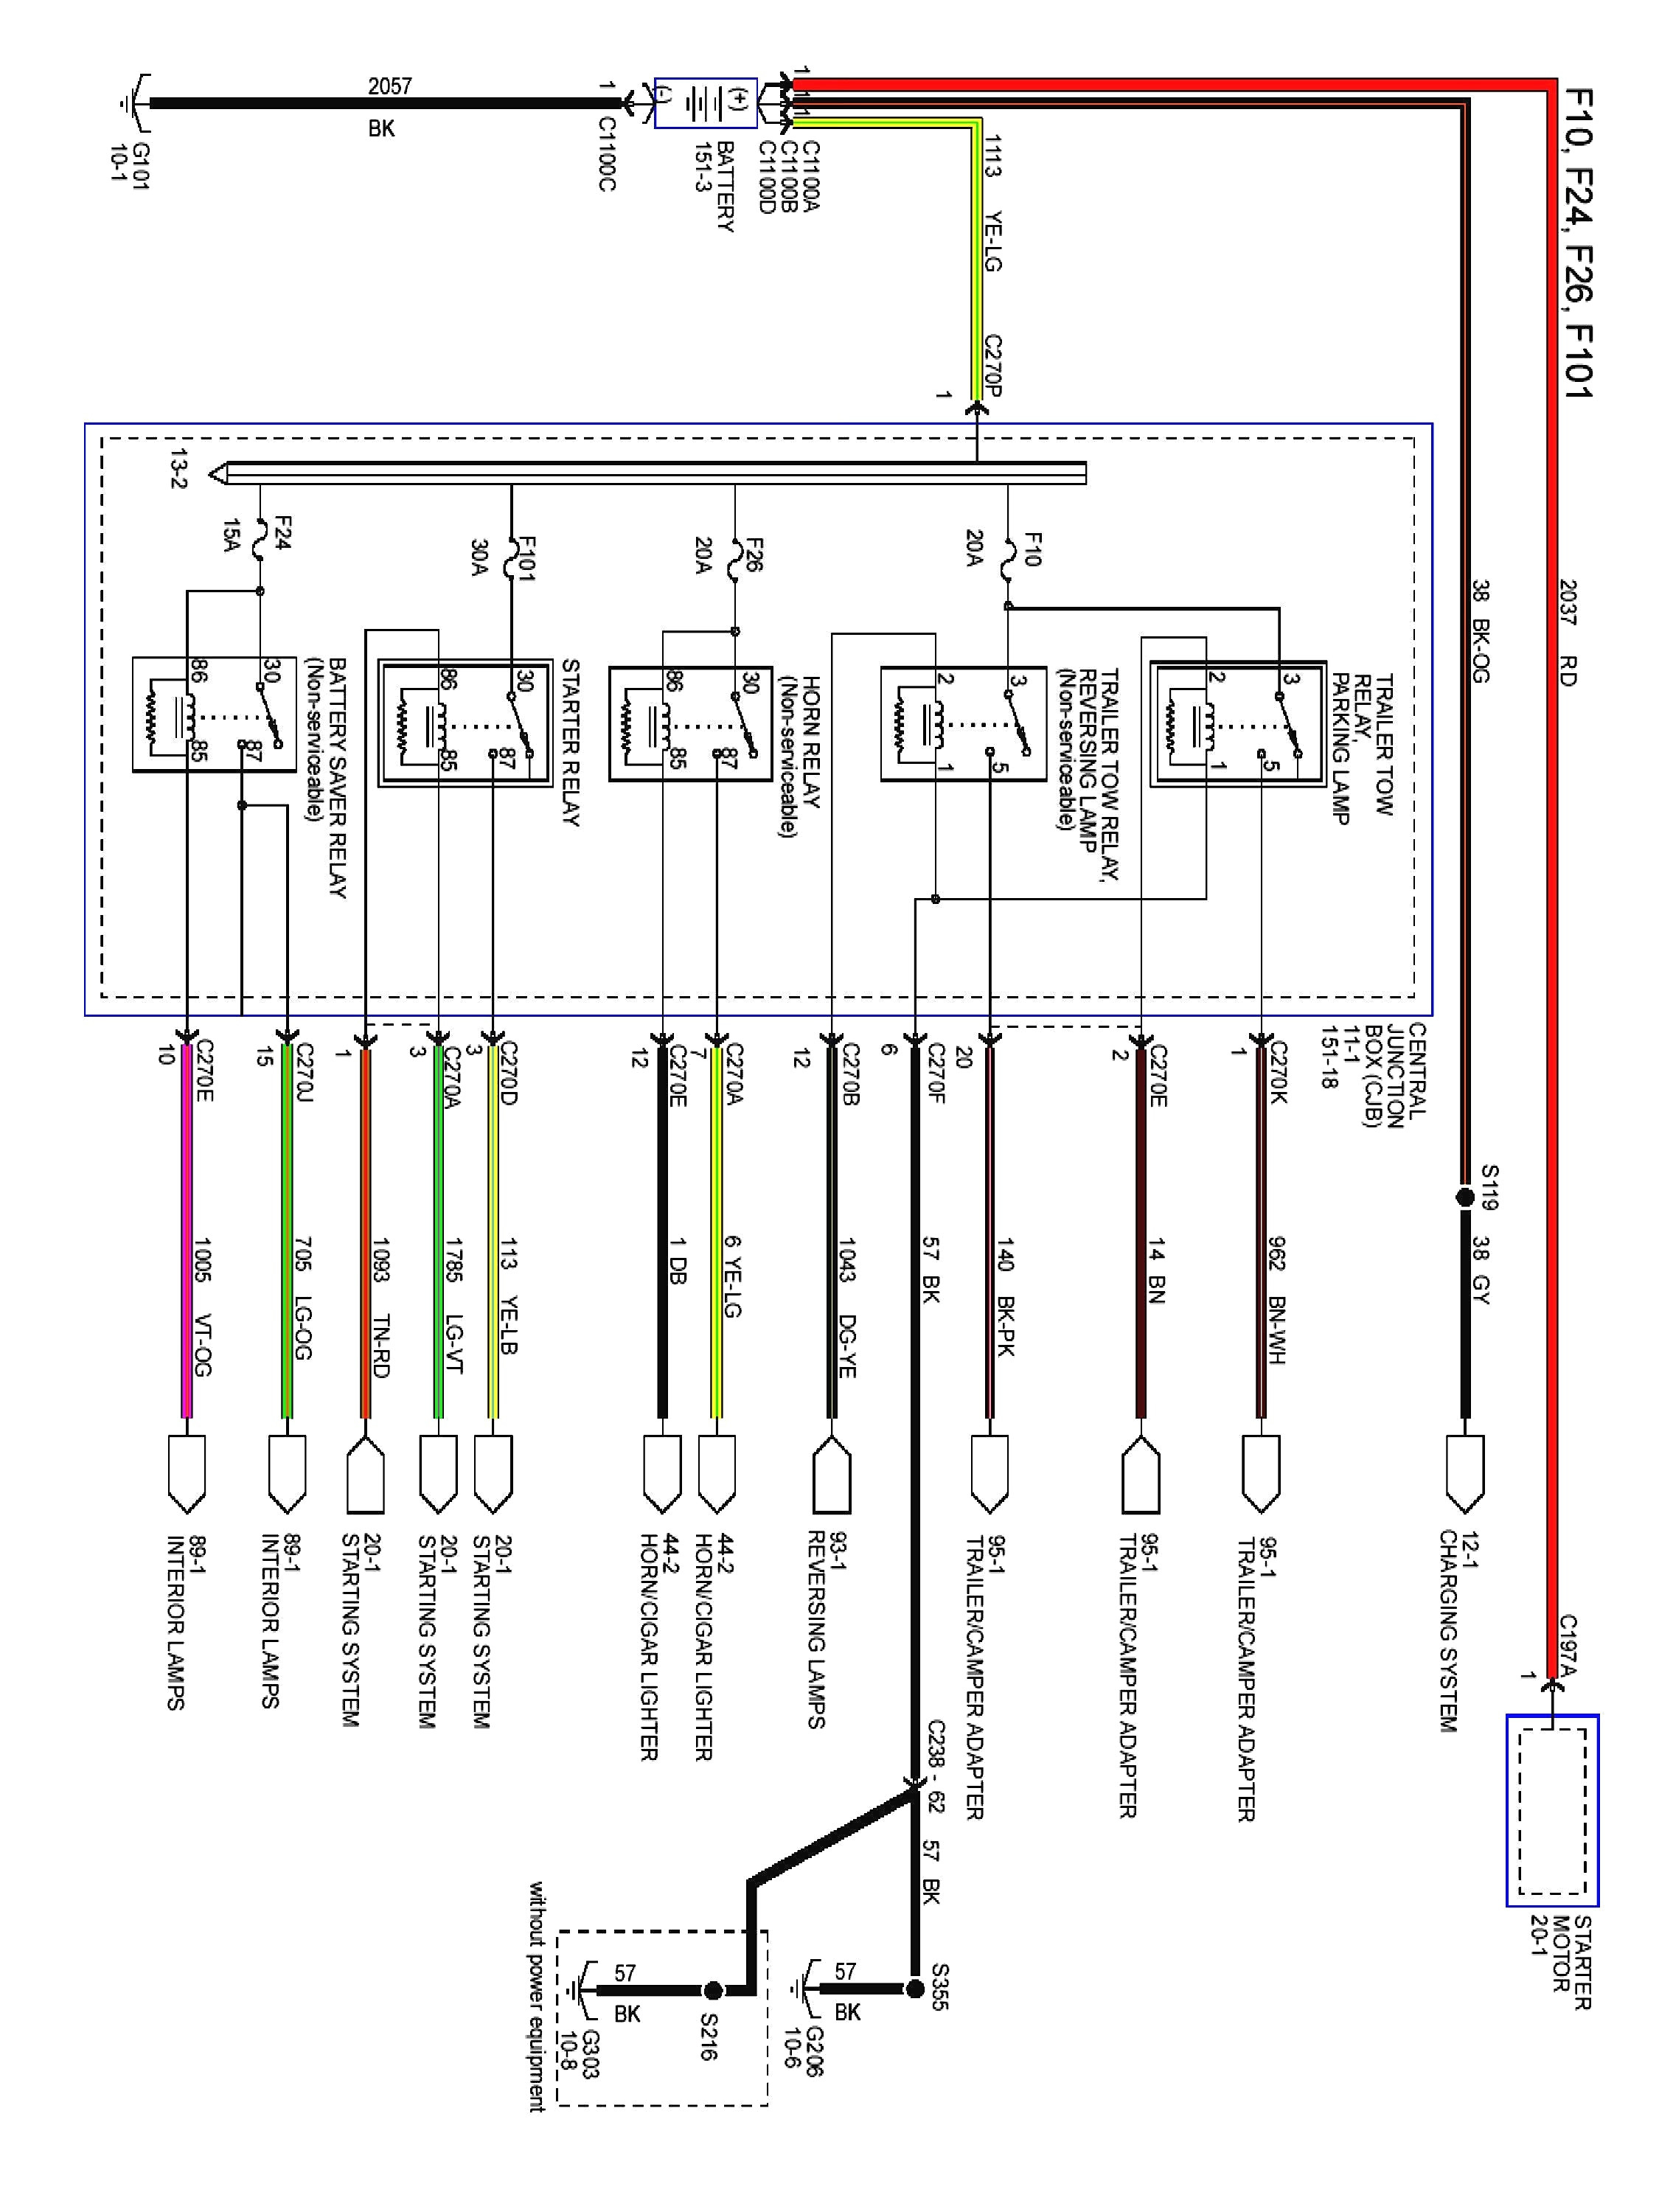 2004 Ford Explorer Stereo Wiring Diagram Valid Wiring Diagram 2003 - 2004 Ford Explorer Radio Wiring Diagram